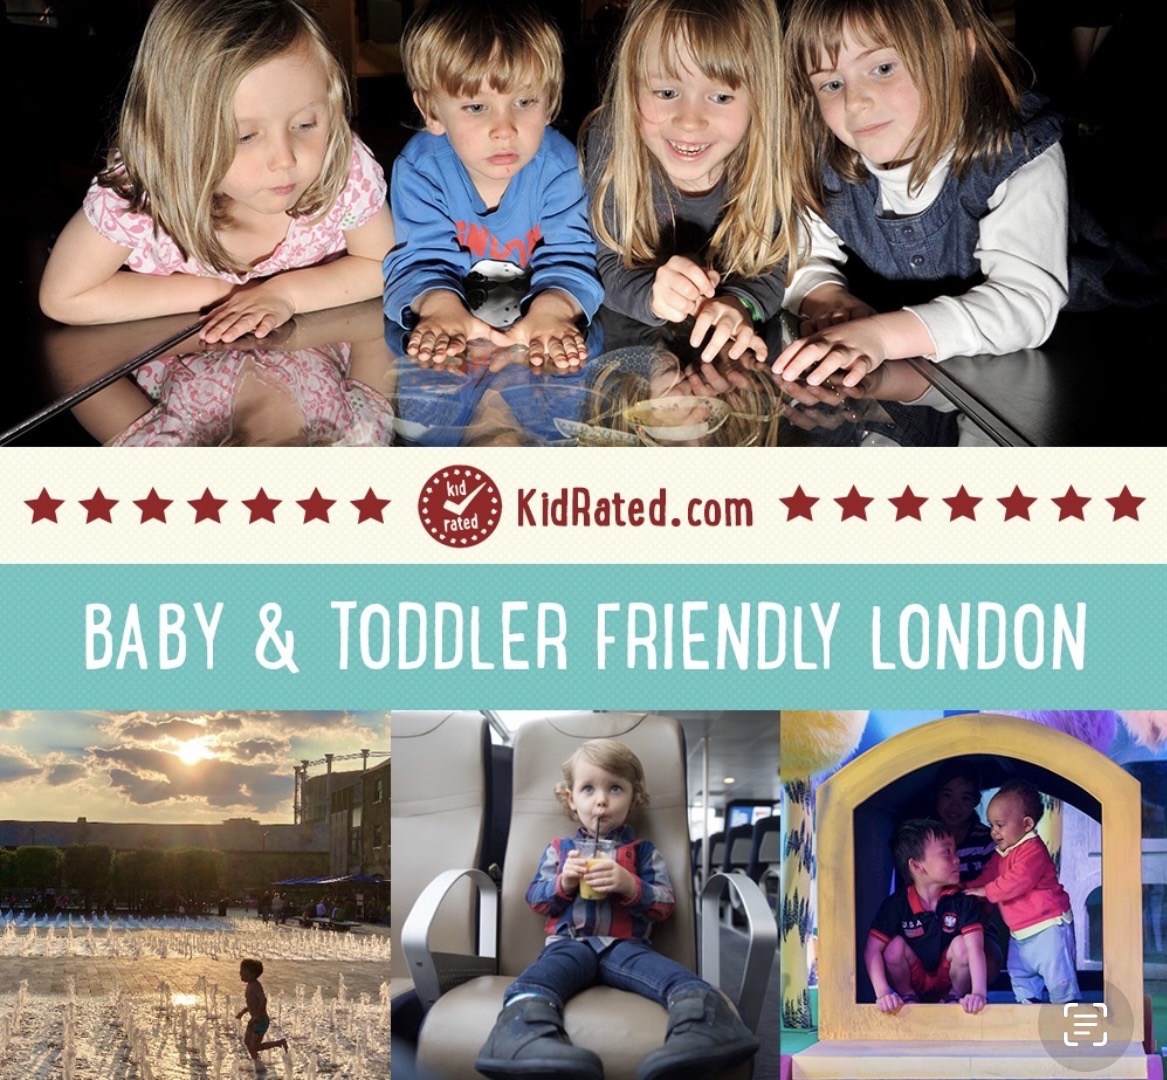 baby & Toddler friendly London